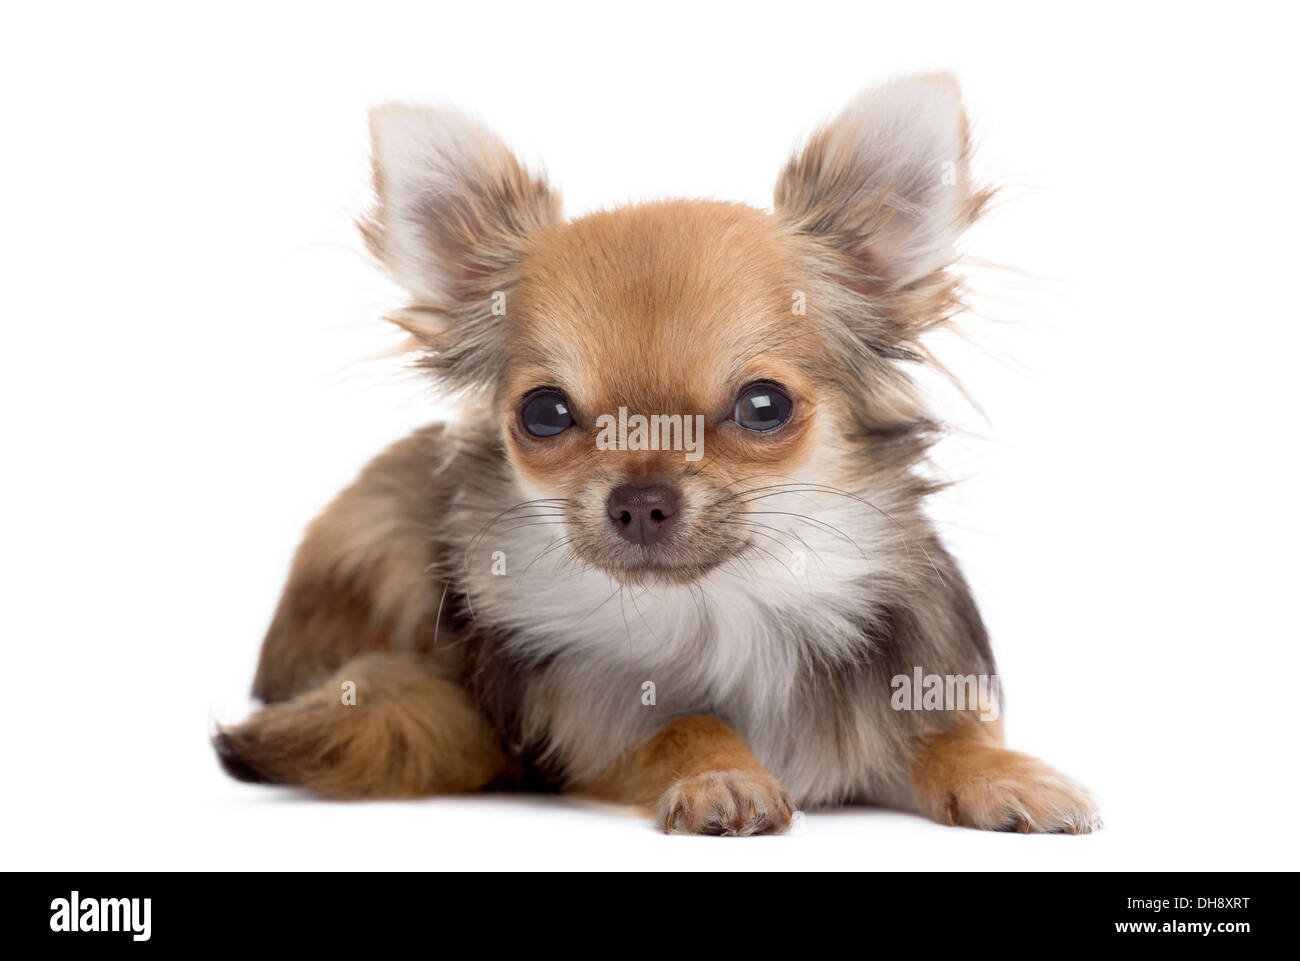 Front view of a Chihuahua lying, looking at the camera against white background Stock Photo